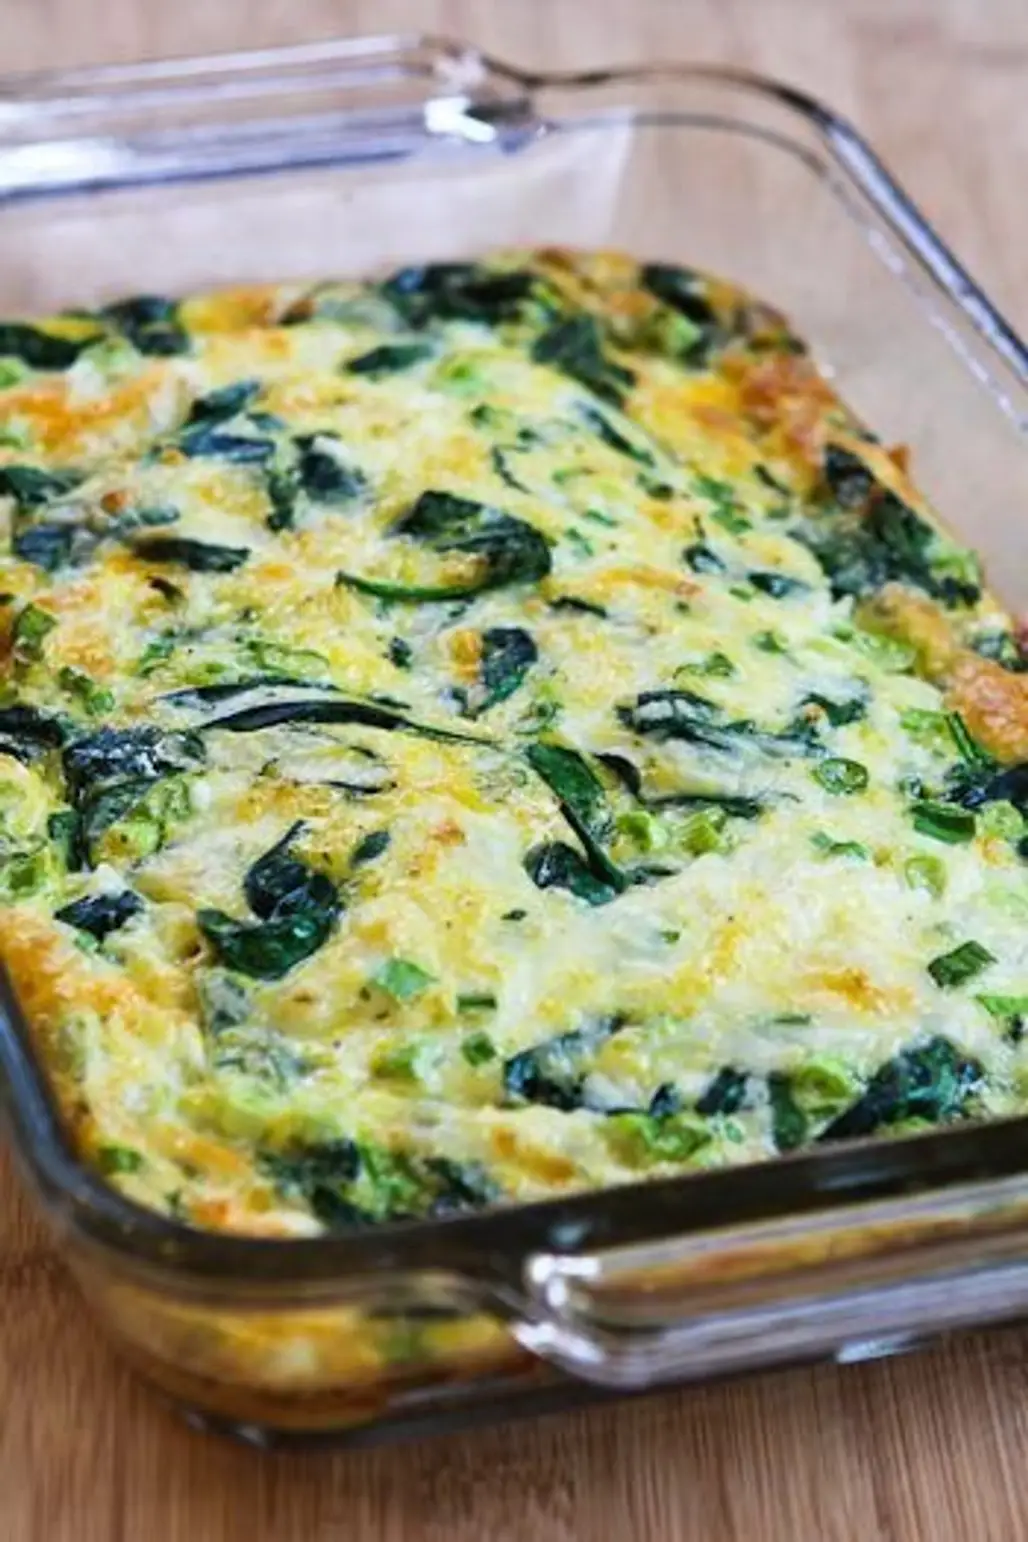 Spinach, Egg, and Cheese Bake